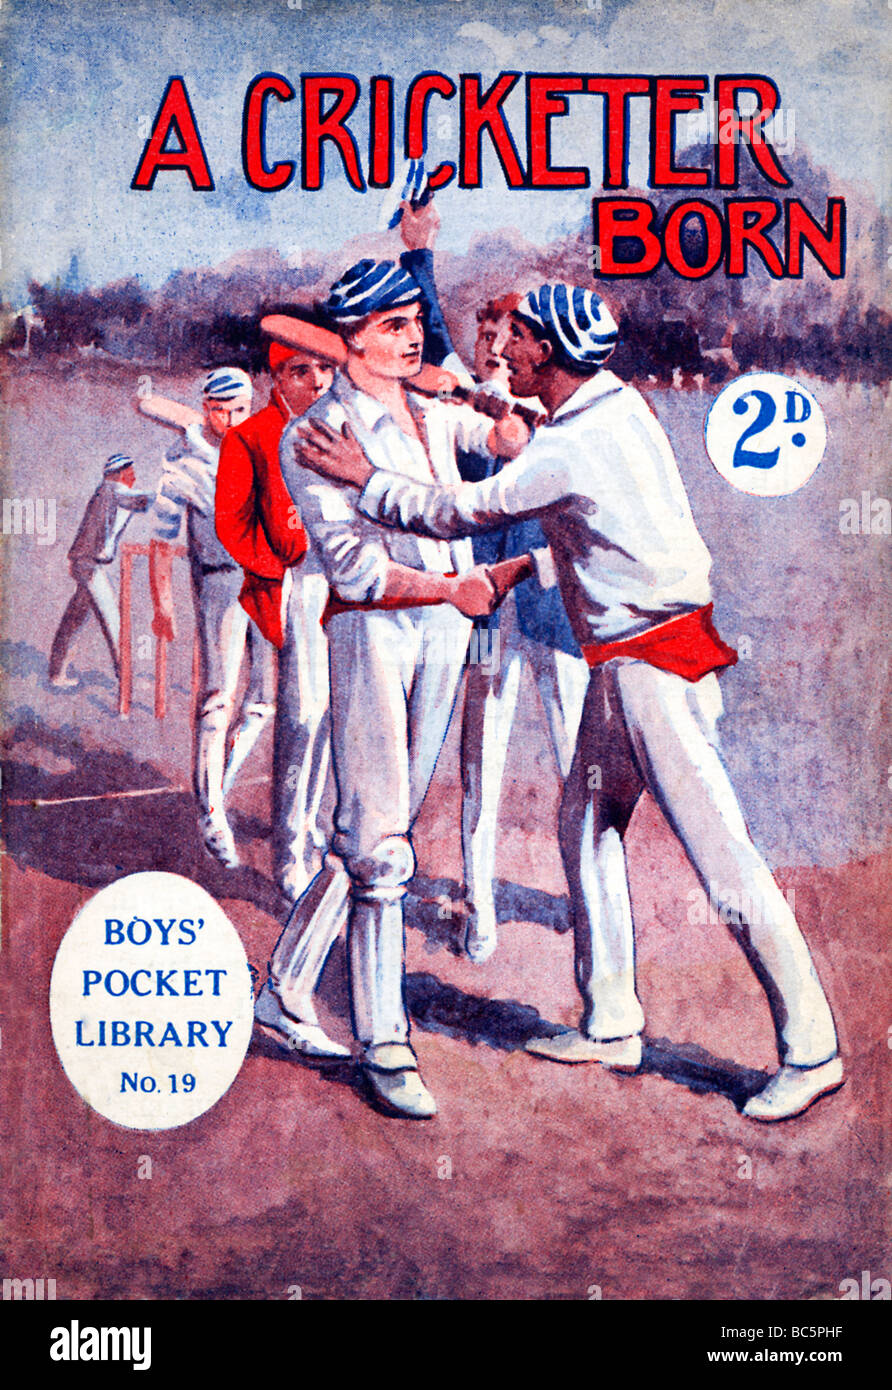 A Cricketer Born 1920s boys pulp fiction pocket book cover with a cricket action story of racial harmony Stock Photo